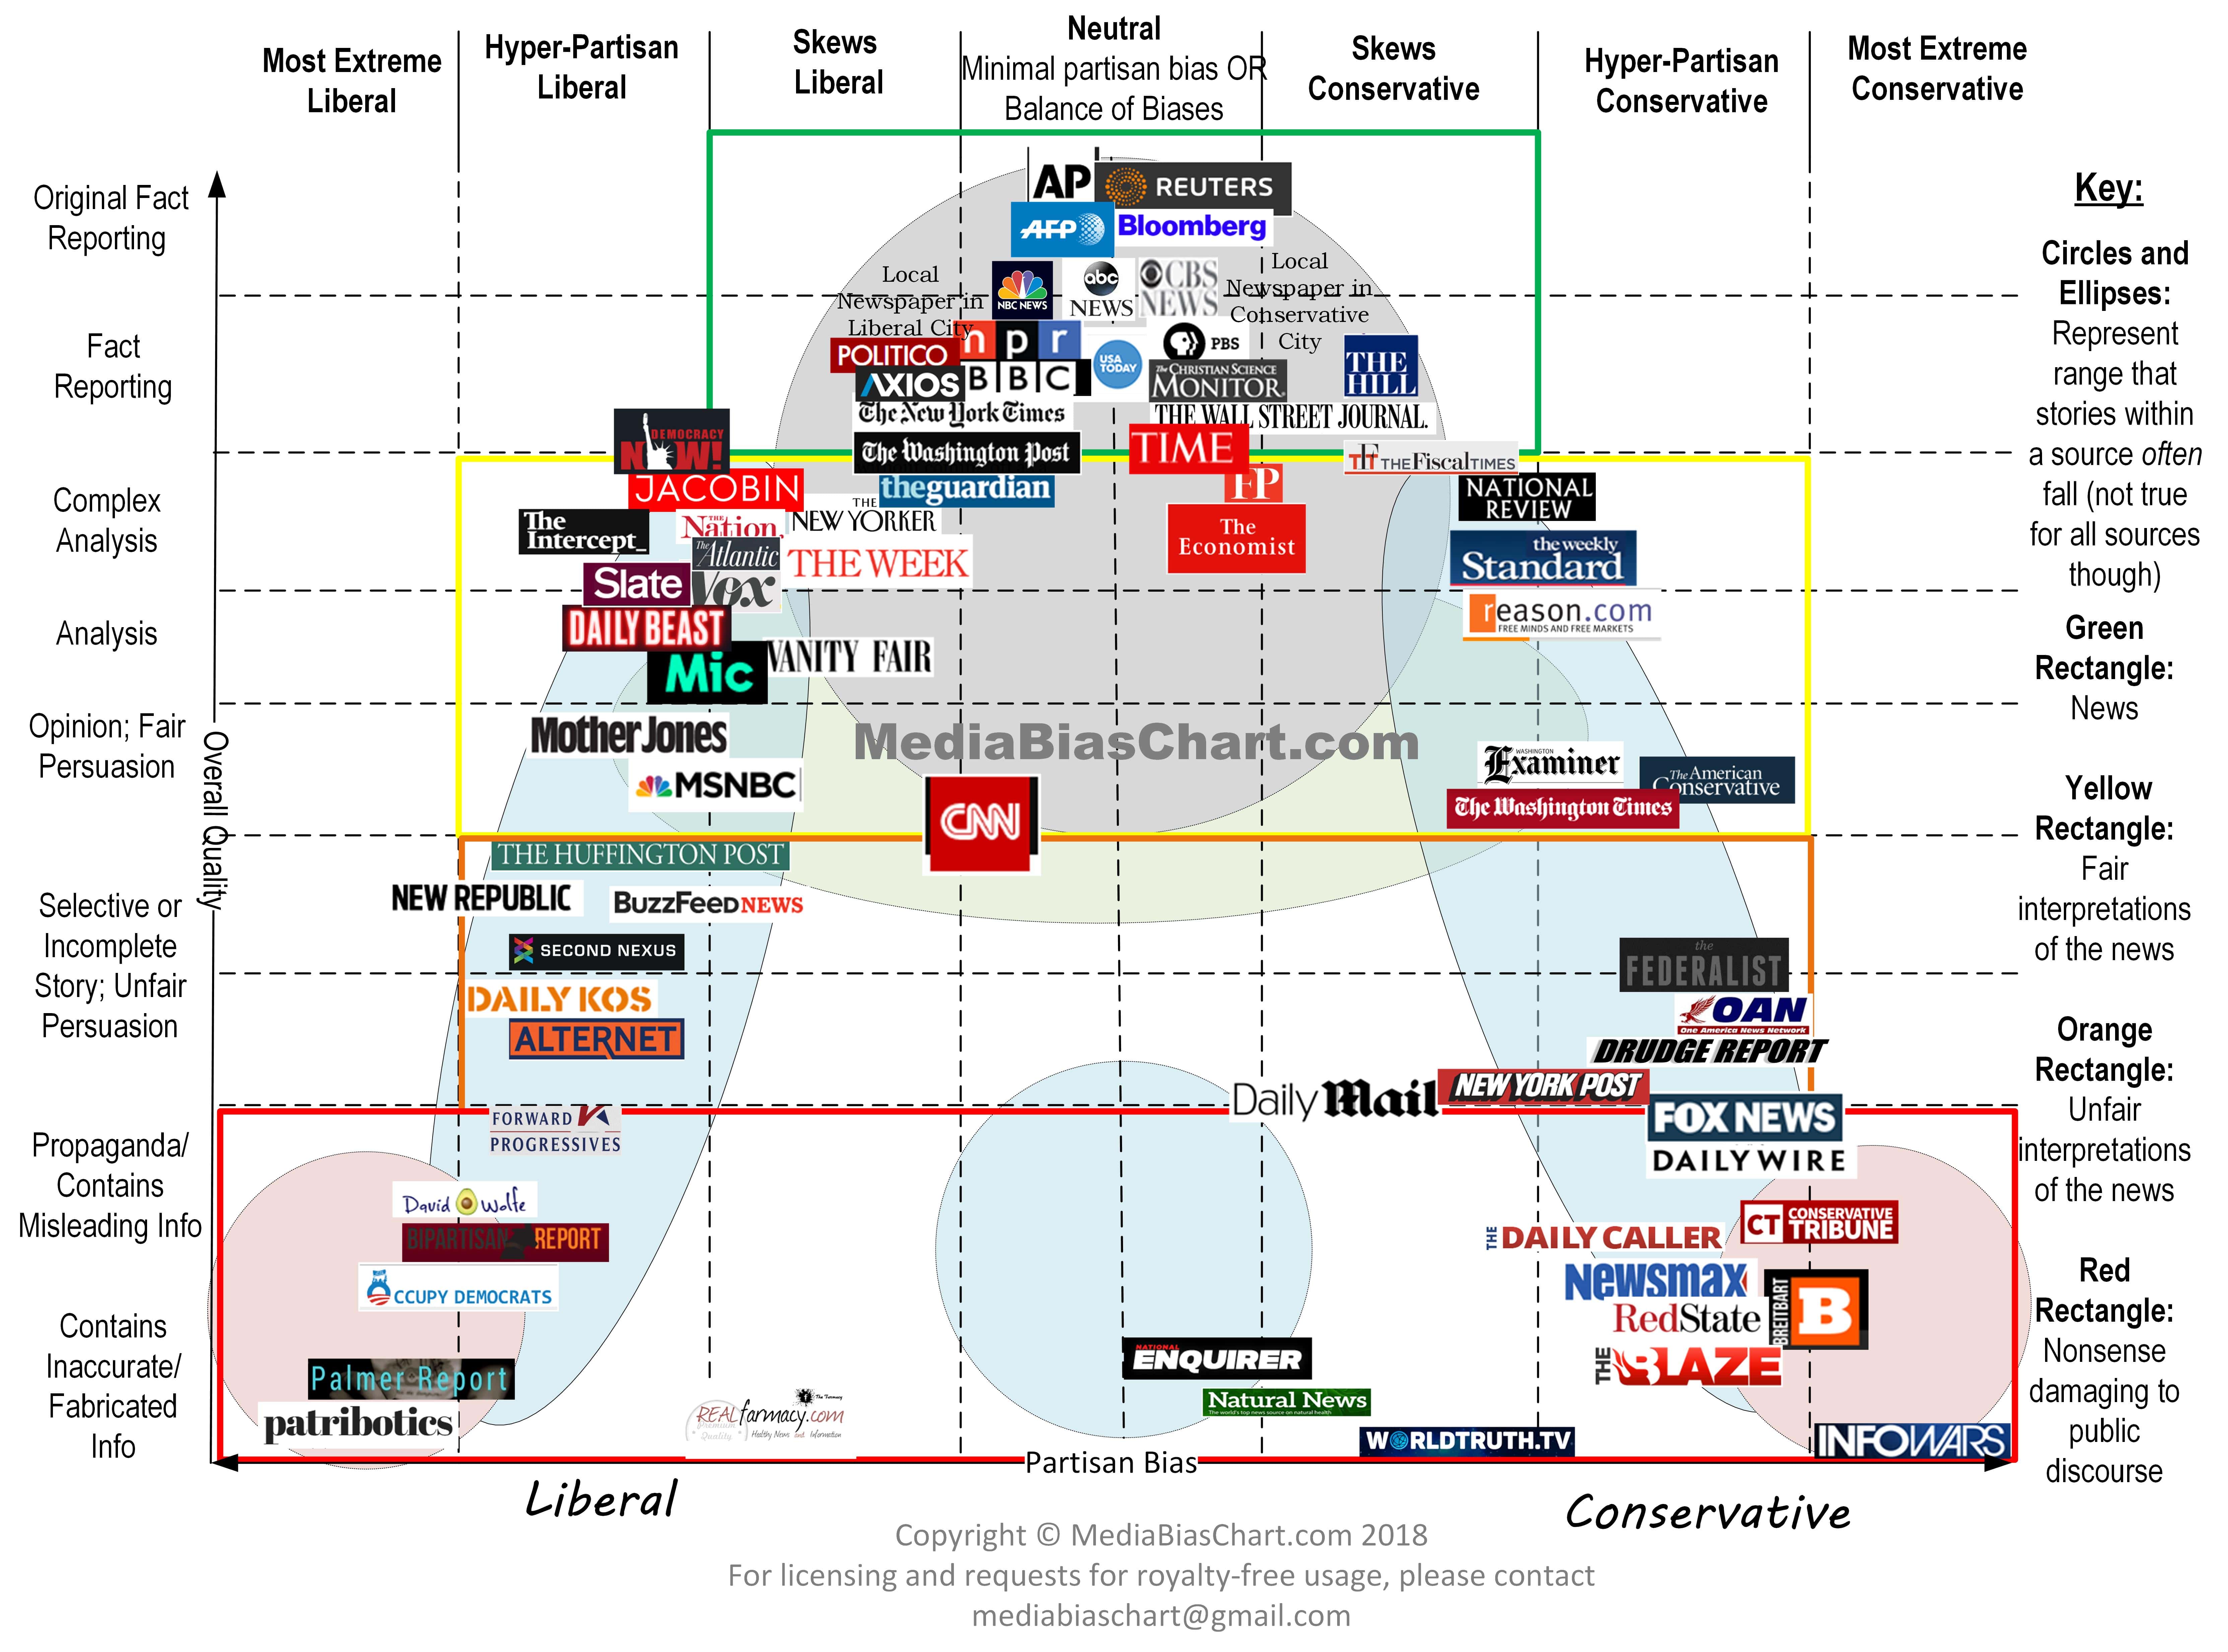 Media Bias Chart: Downloadable Image and Standard License ad 